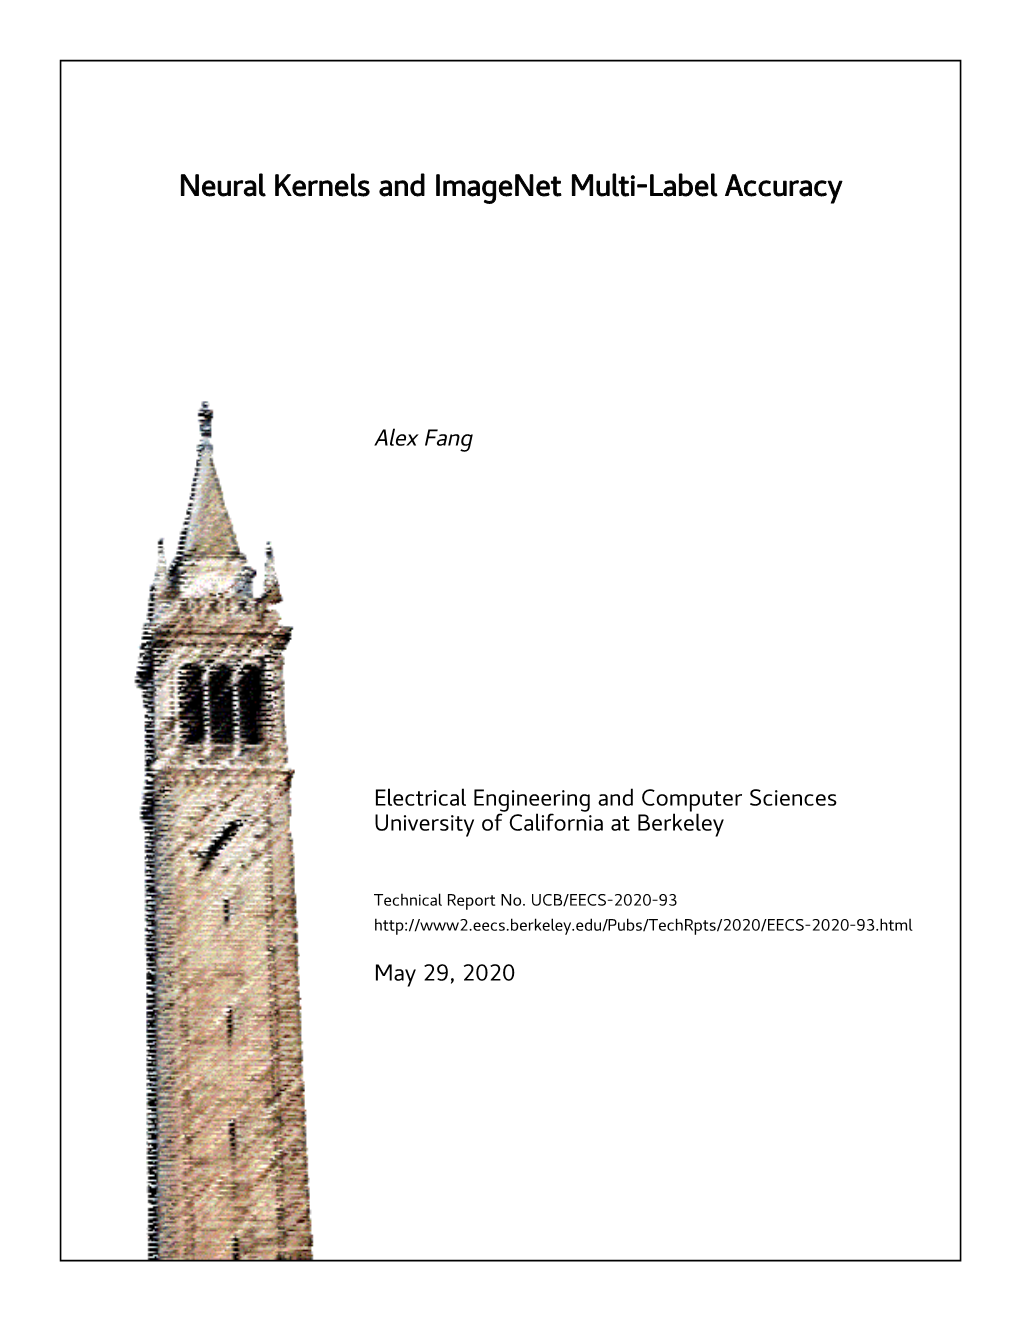 Neural Kernels and Imagenet Multi-Label Accuracy